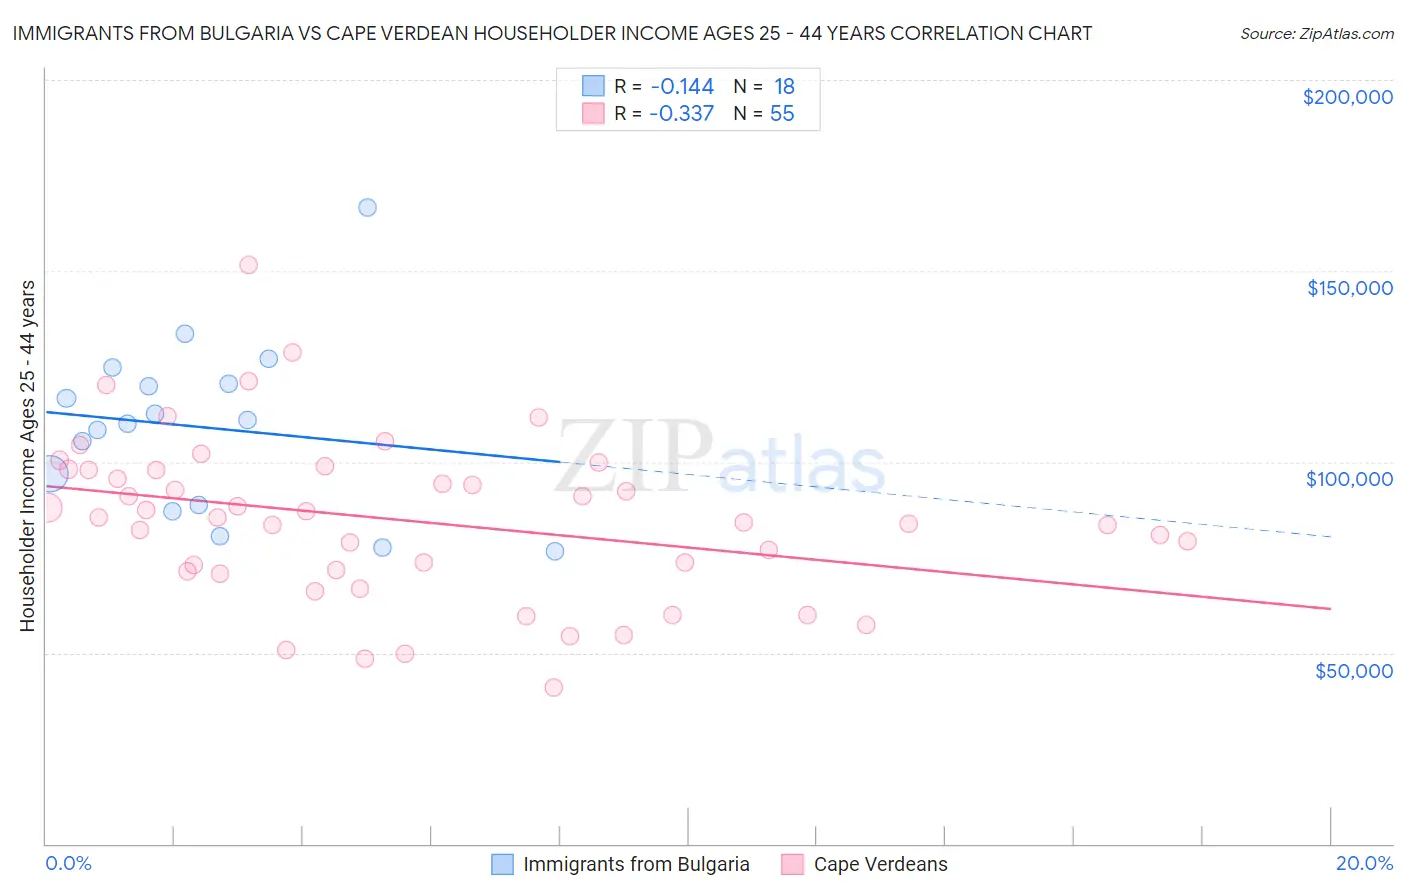 Immigrants from Bulgaria vs Cape Verdean Householder Income Ages 25 - 44 years